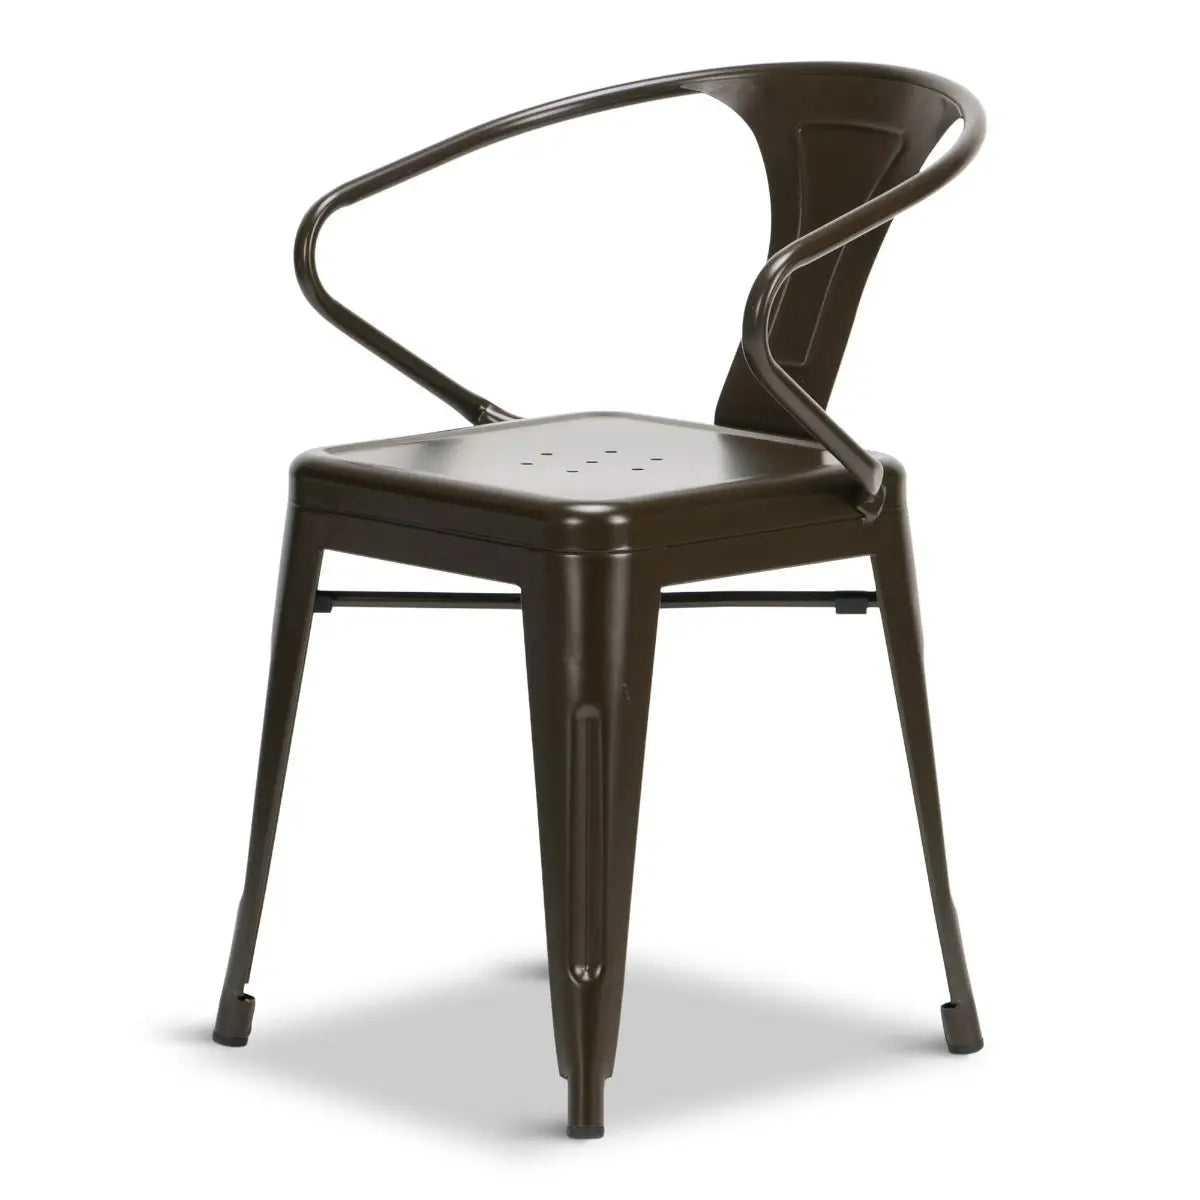 BRUSHED METAL CAFE CHAIR WITH ARMS